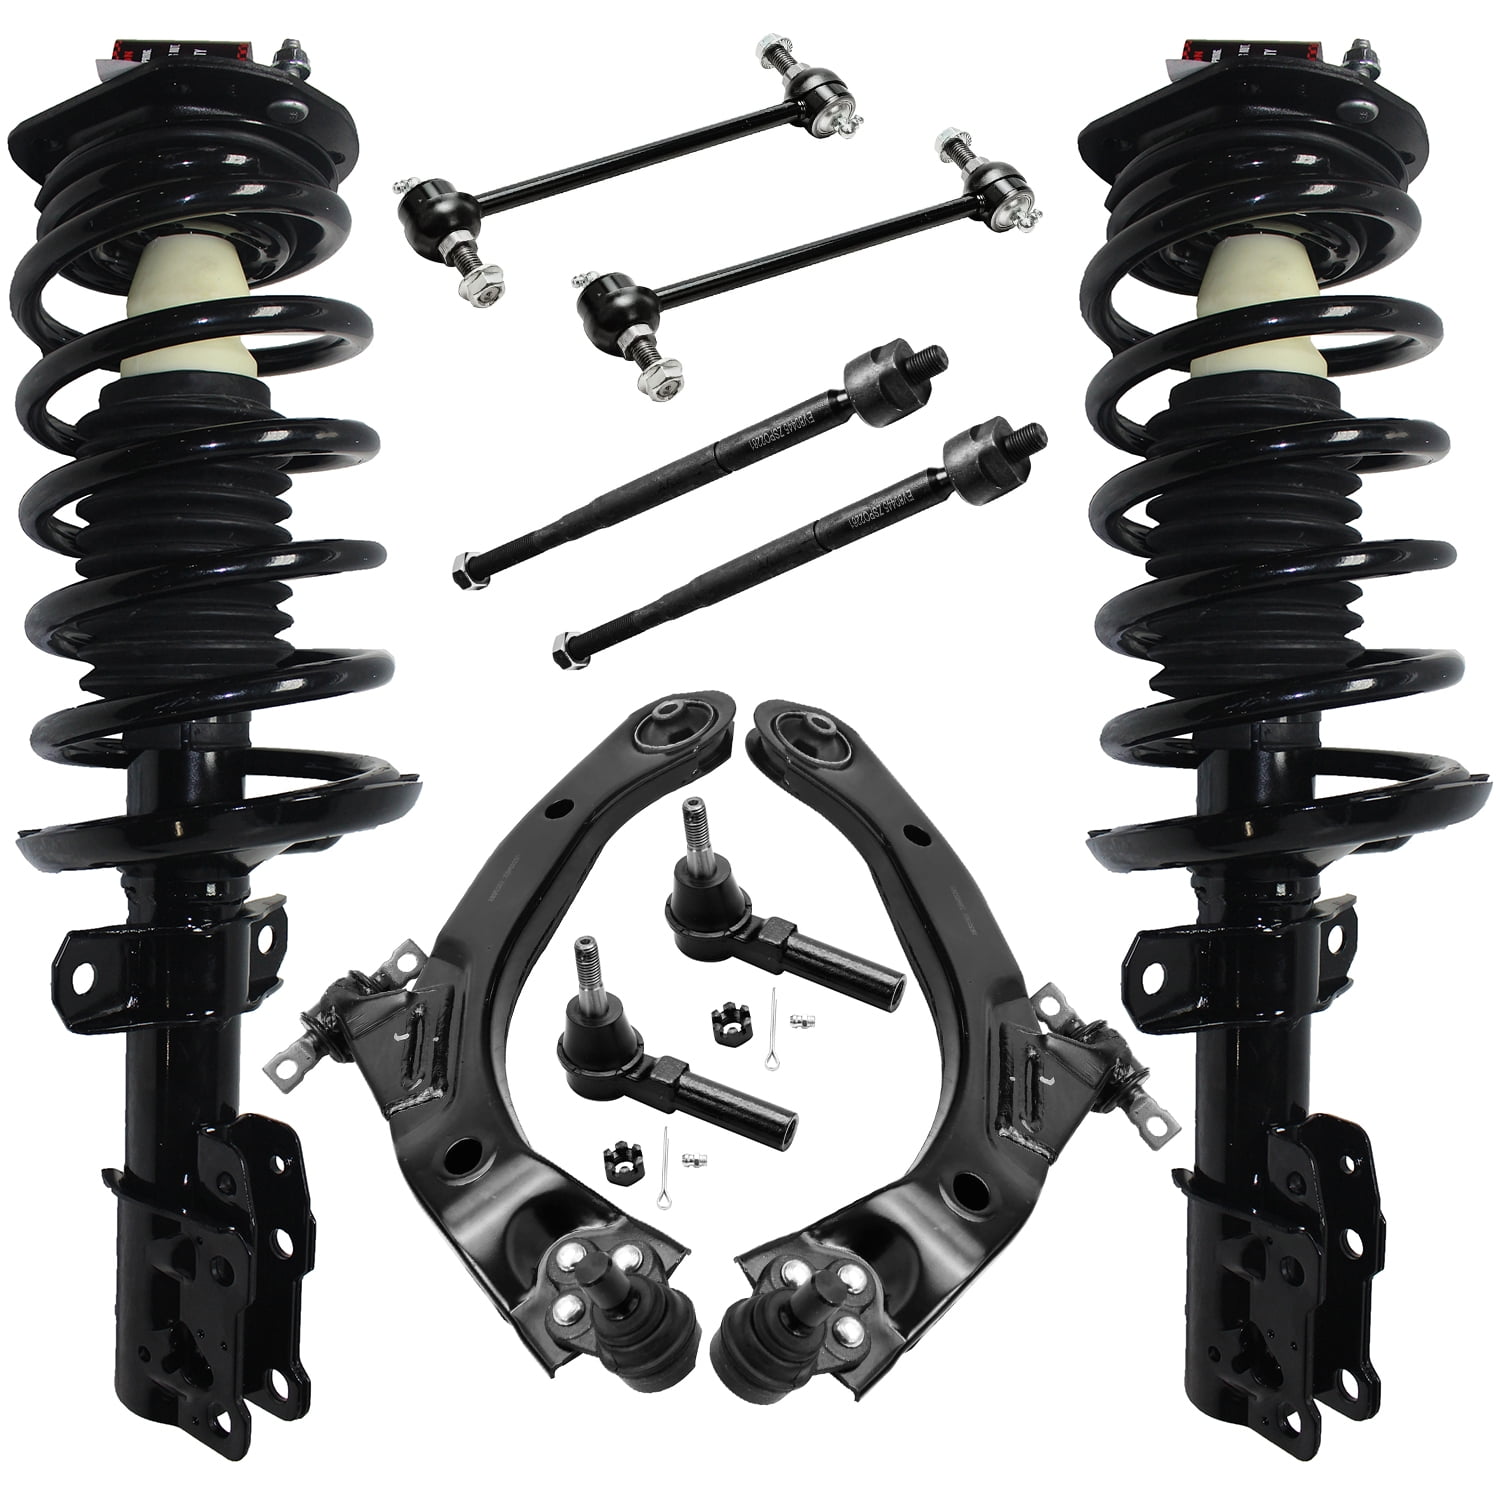 Left HD Outer Tie Rod End, 1 1 New 4pc Tie Rod Suspension Kit - Left Outer Tie Rod End Connecting @ Pitman Arm, Front Upper Ball Joints for 4WD / 4x4 2 Detroit Axle 